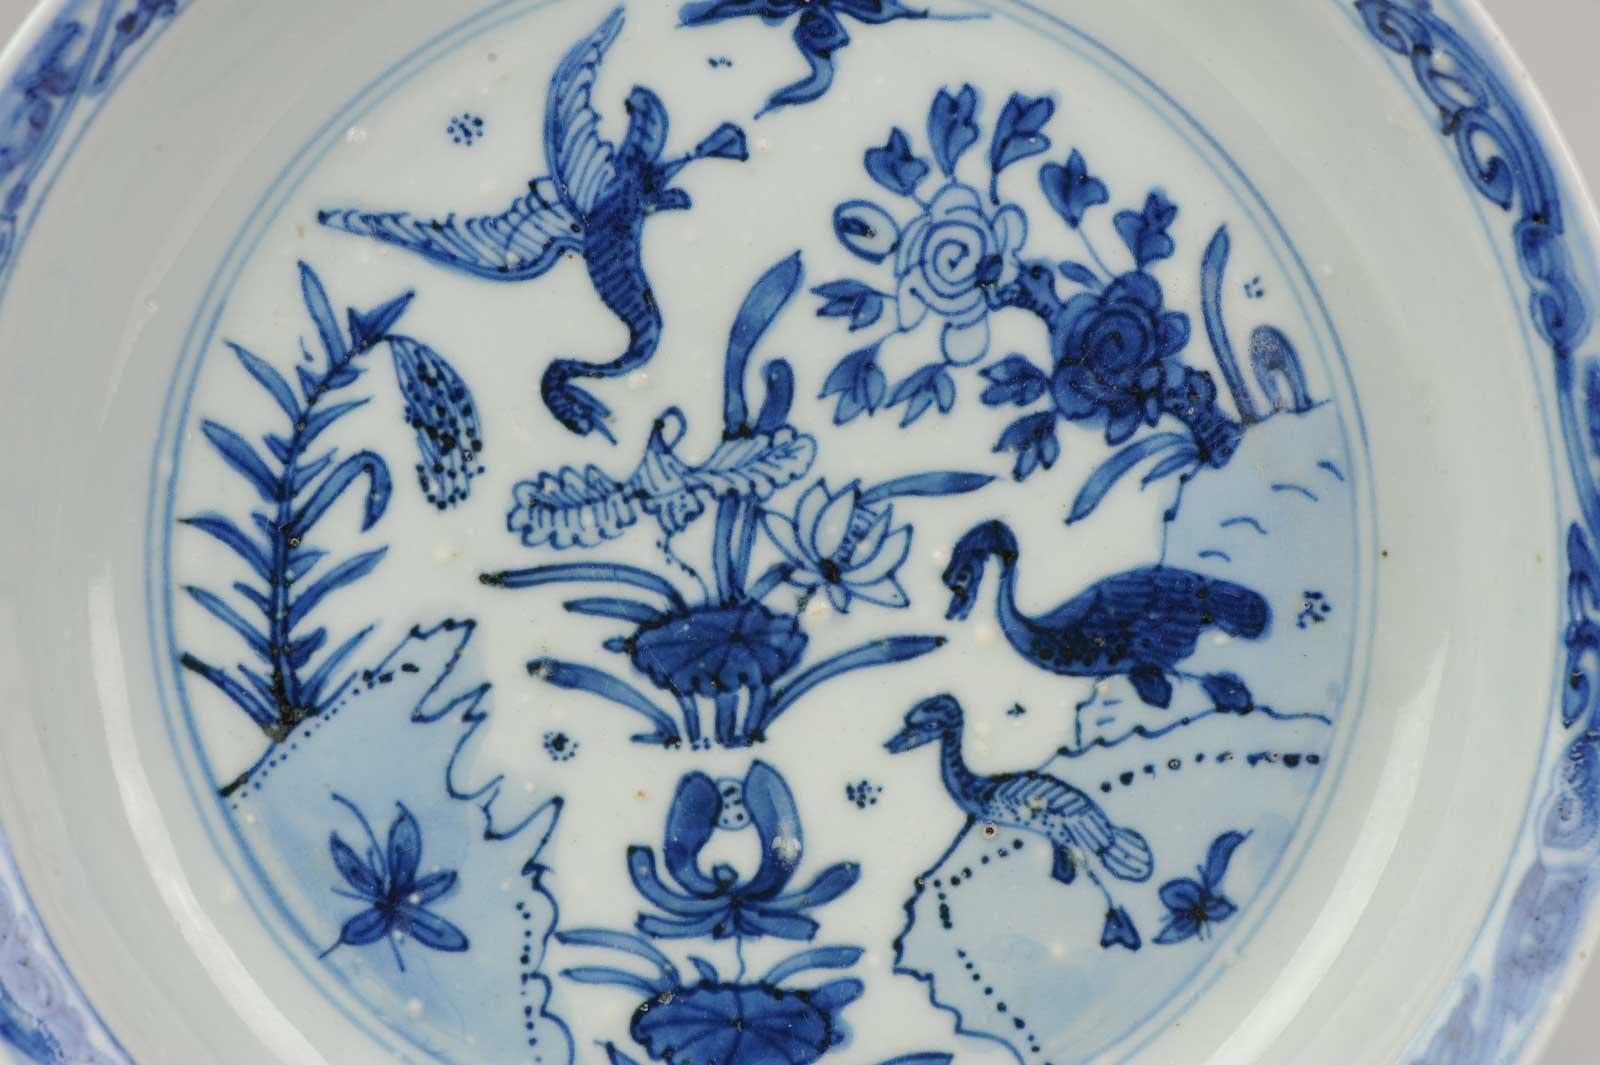 A very nicely decorated plate in very good condition. A late Ming Ko-Sometsuke porcelain dish, Wanli or Tianqi Period, 1621-1627.
 
Condition:
Overall condition 2 or 3 fritspots and some firing bubbles to the rim. A firinf flaw also. Size: 186 x